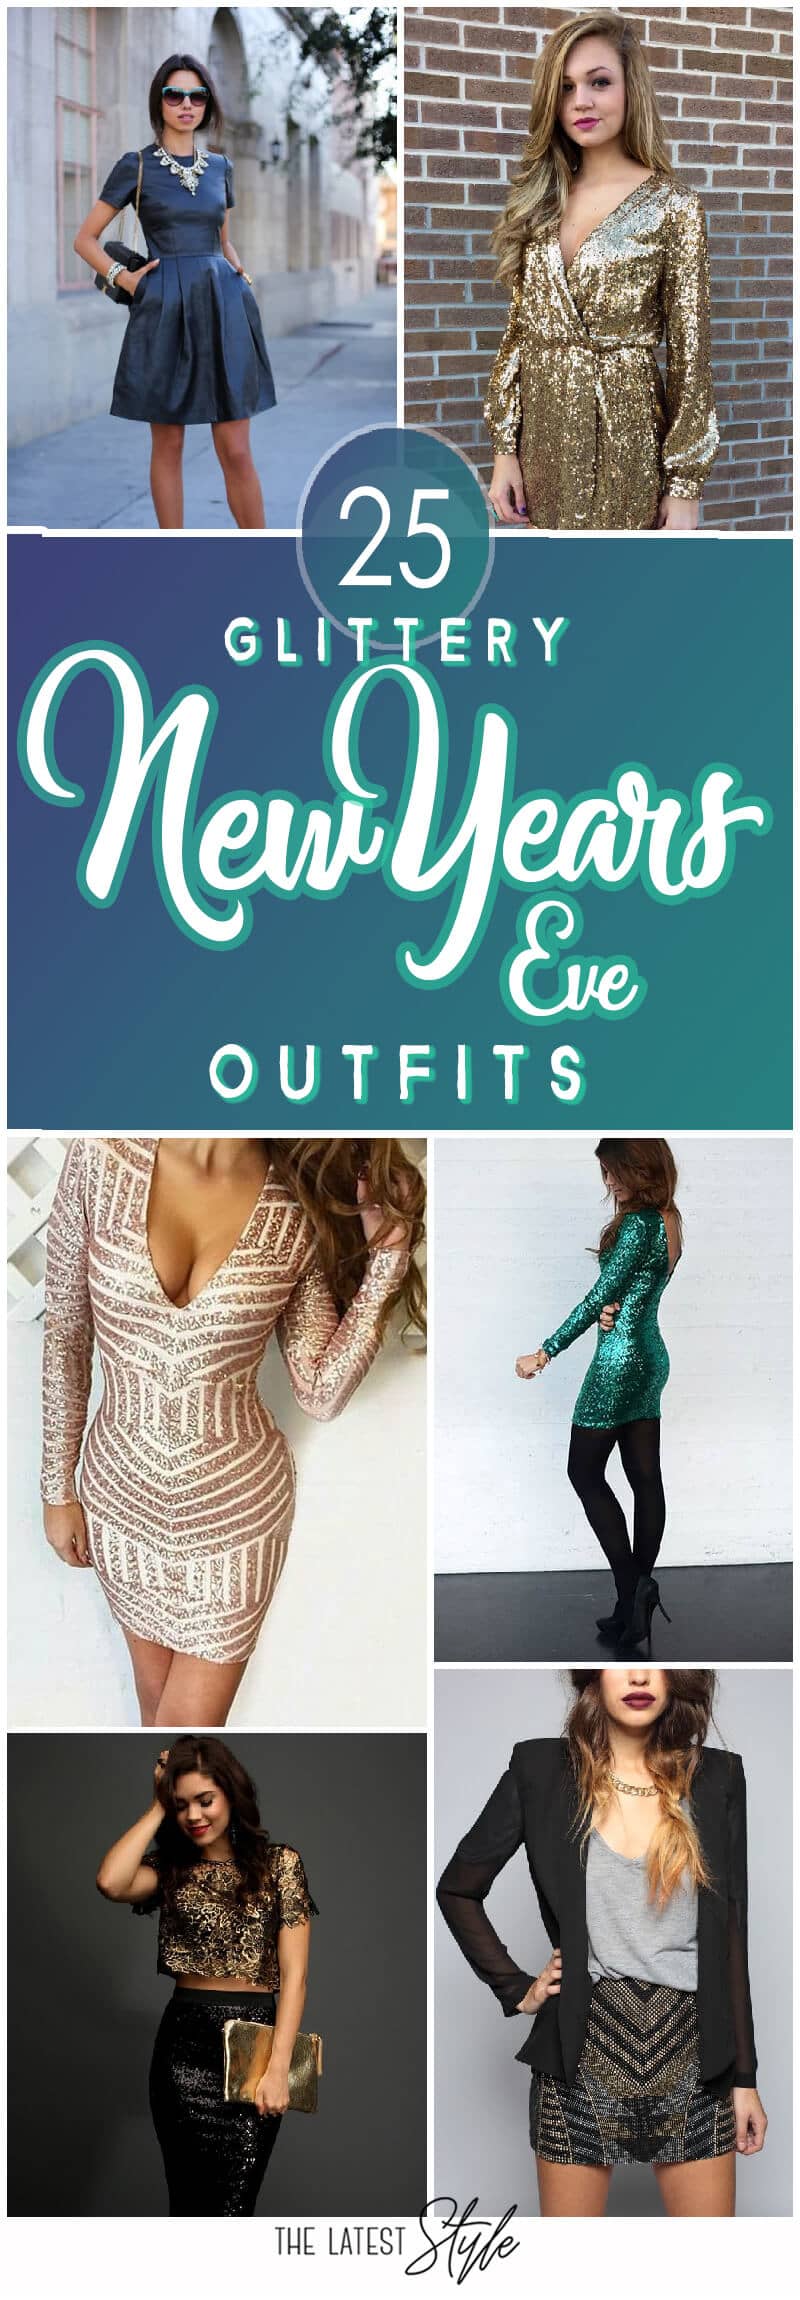 25 Glittery New Years Eve Outfits for Glamorous Gals